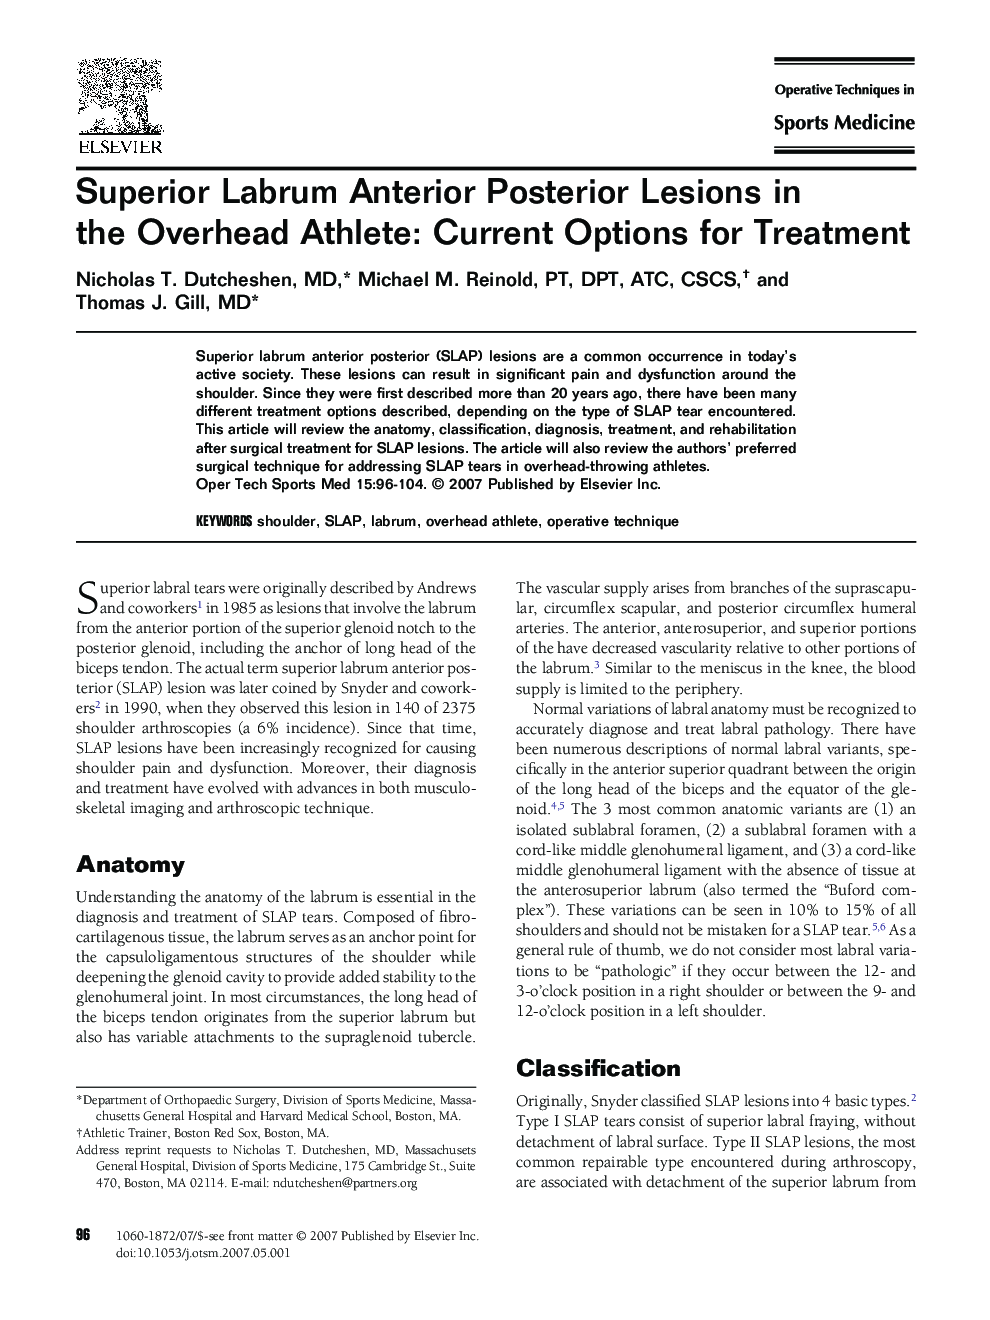 Superior Labrum Anterior Posterior Lesions in the Overhead Athlete: Current Options for Treatment